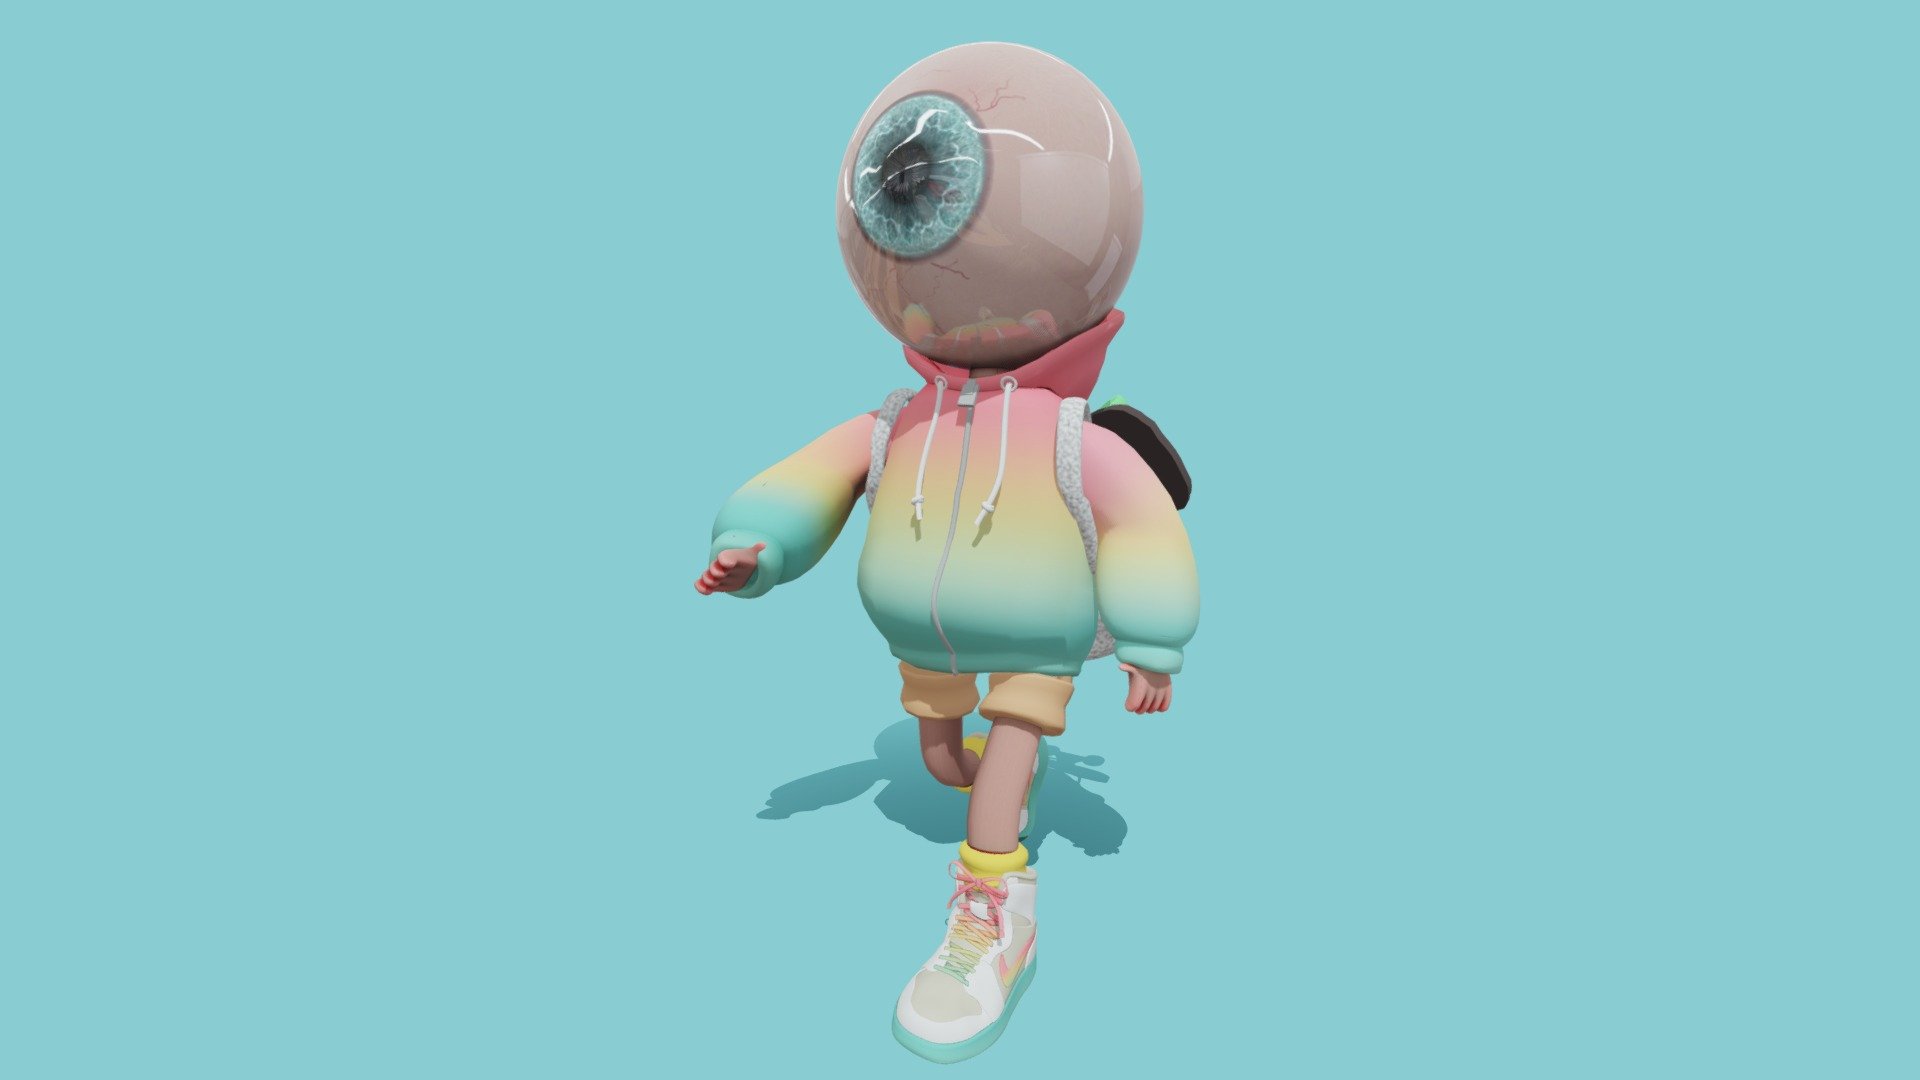 Art from 2D to 3D, low poly animated. Based on the conceptual art of Zatransis (Mike Henry). Made with Blender.

.blend file and texture maps in the zip file.

follow me also on:
https://www.instagram.com/bruno_sales3d/ - EYEBALL KID - Buy Royalty Free 3D model by bruno_sales 3d model